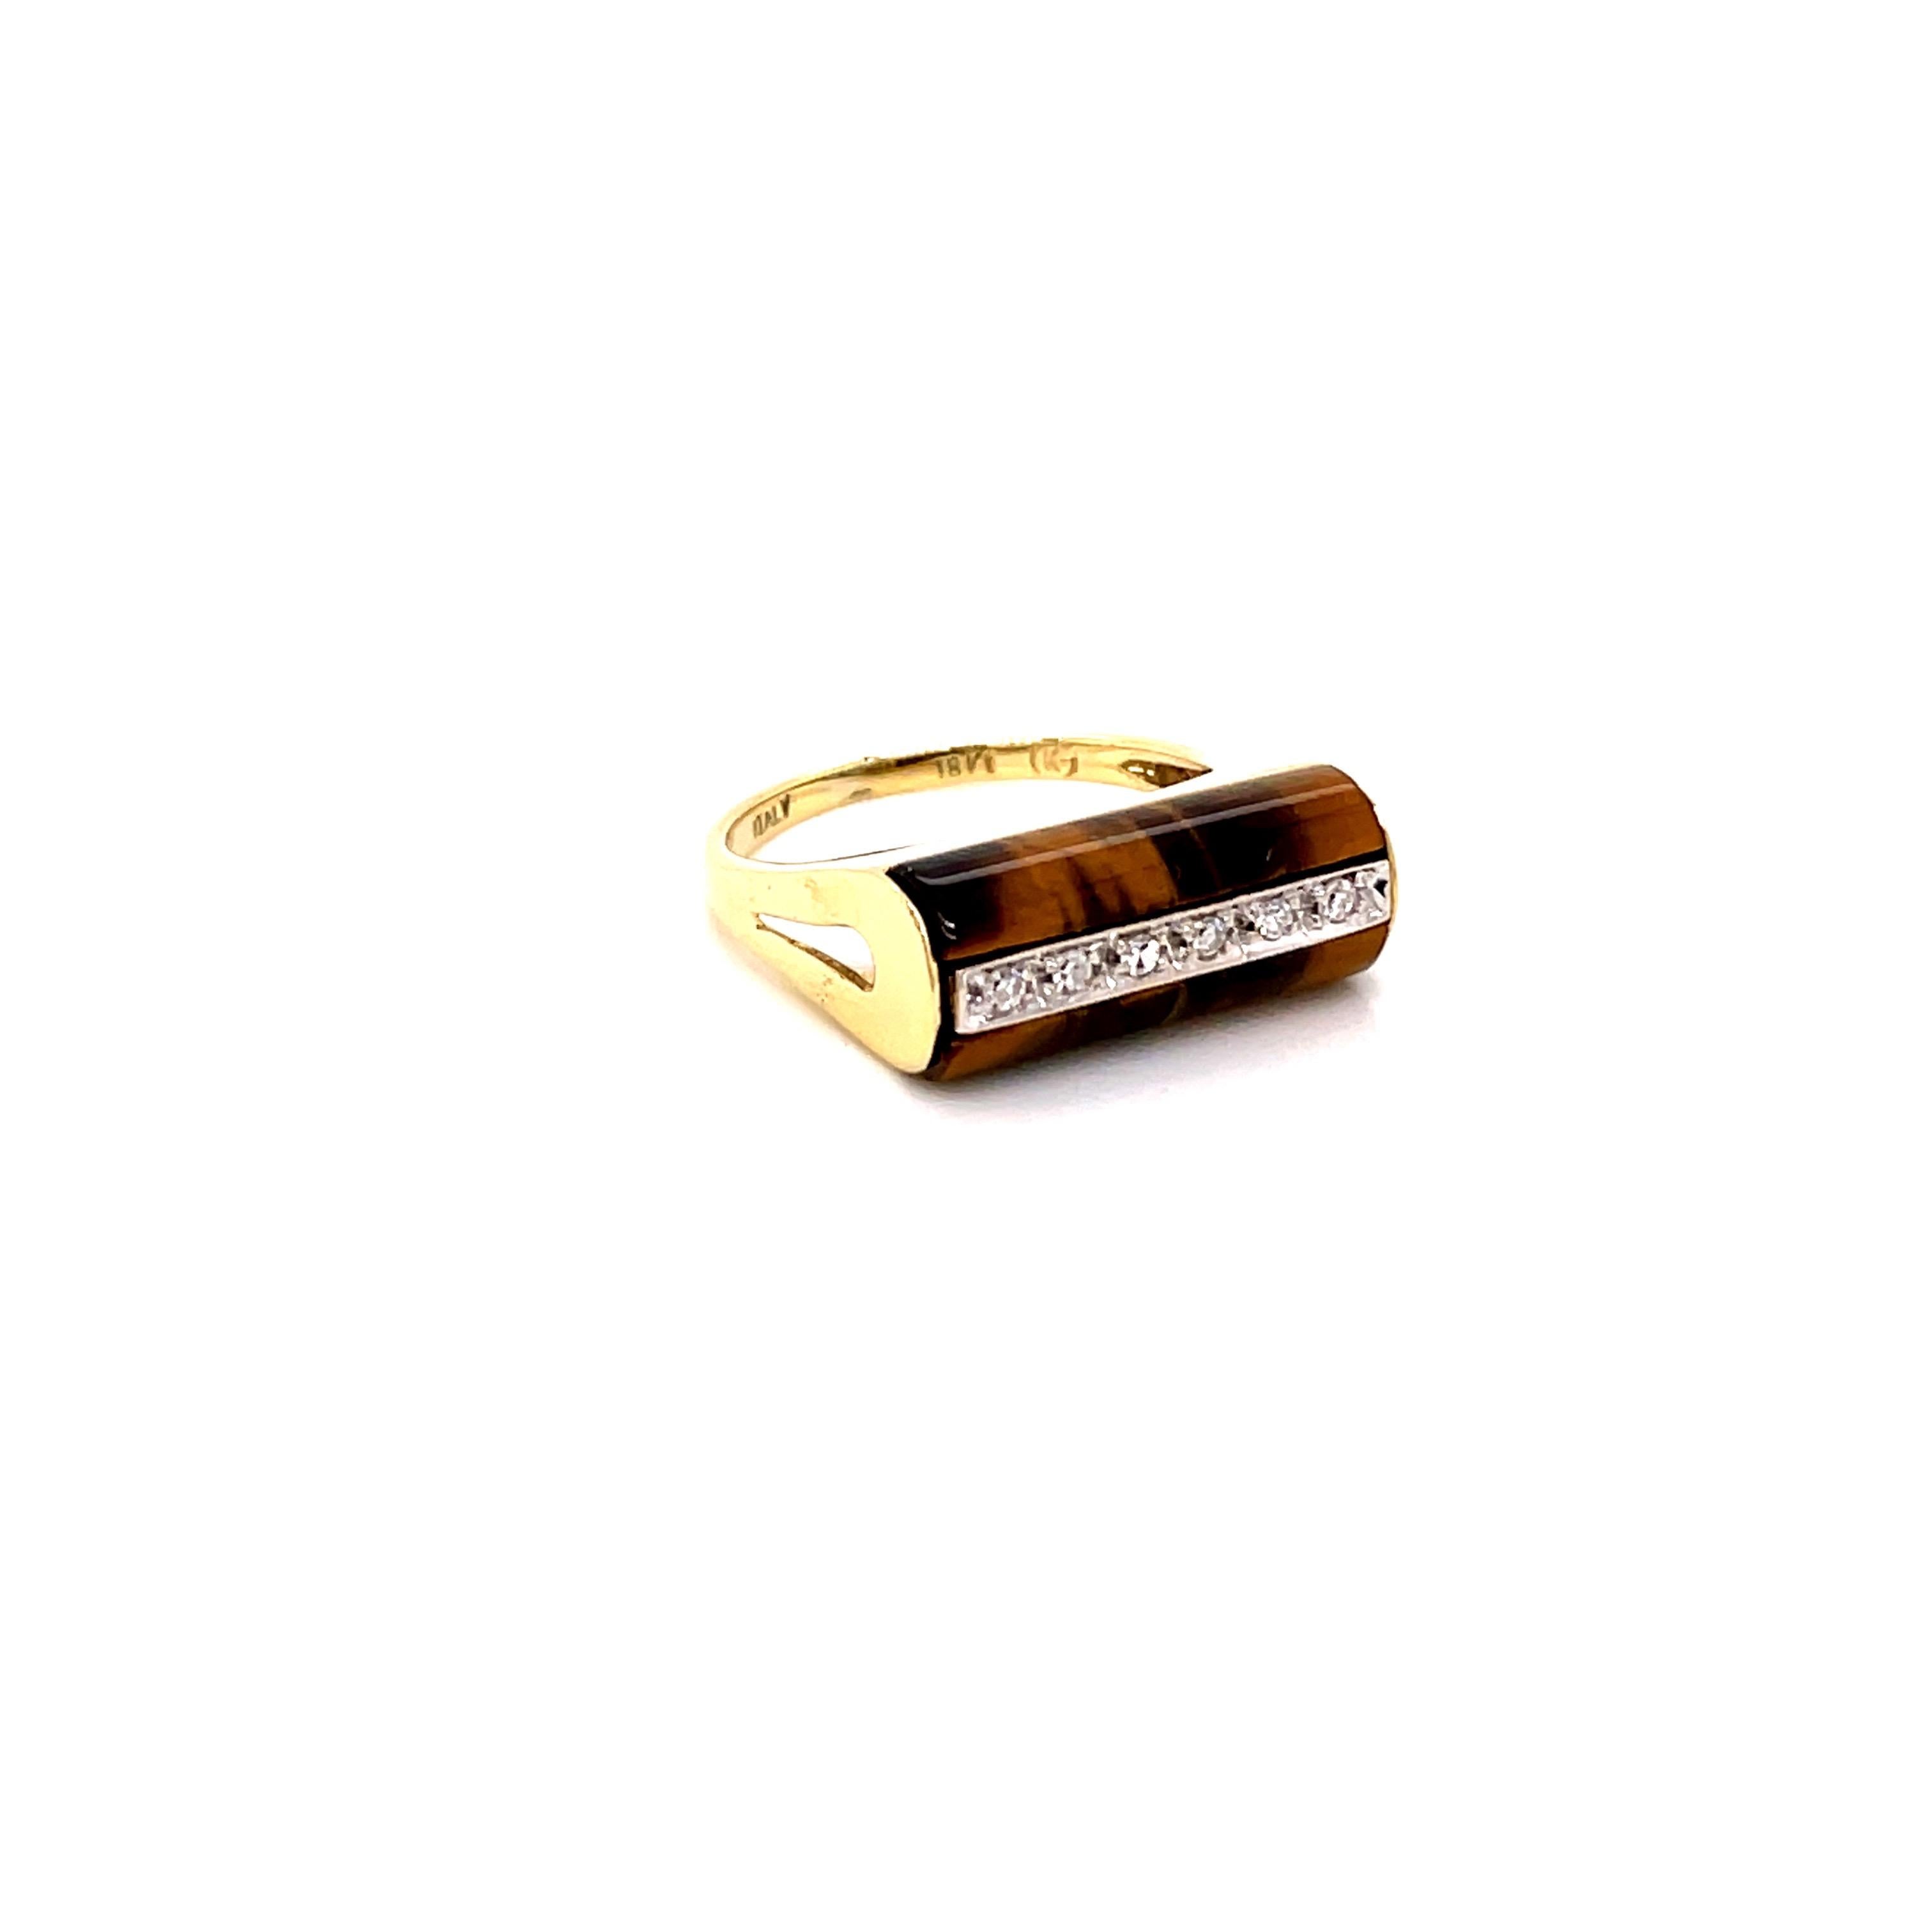 Contemporary Vintage 18K Yellow Gold Tiger’s Eye and Diamond Ring